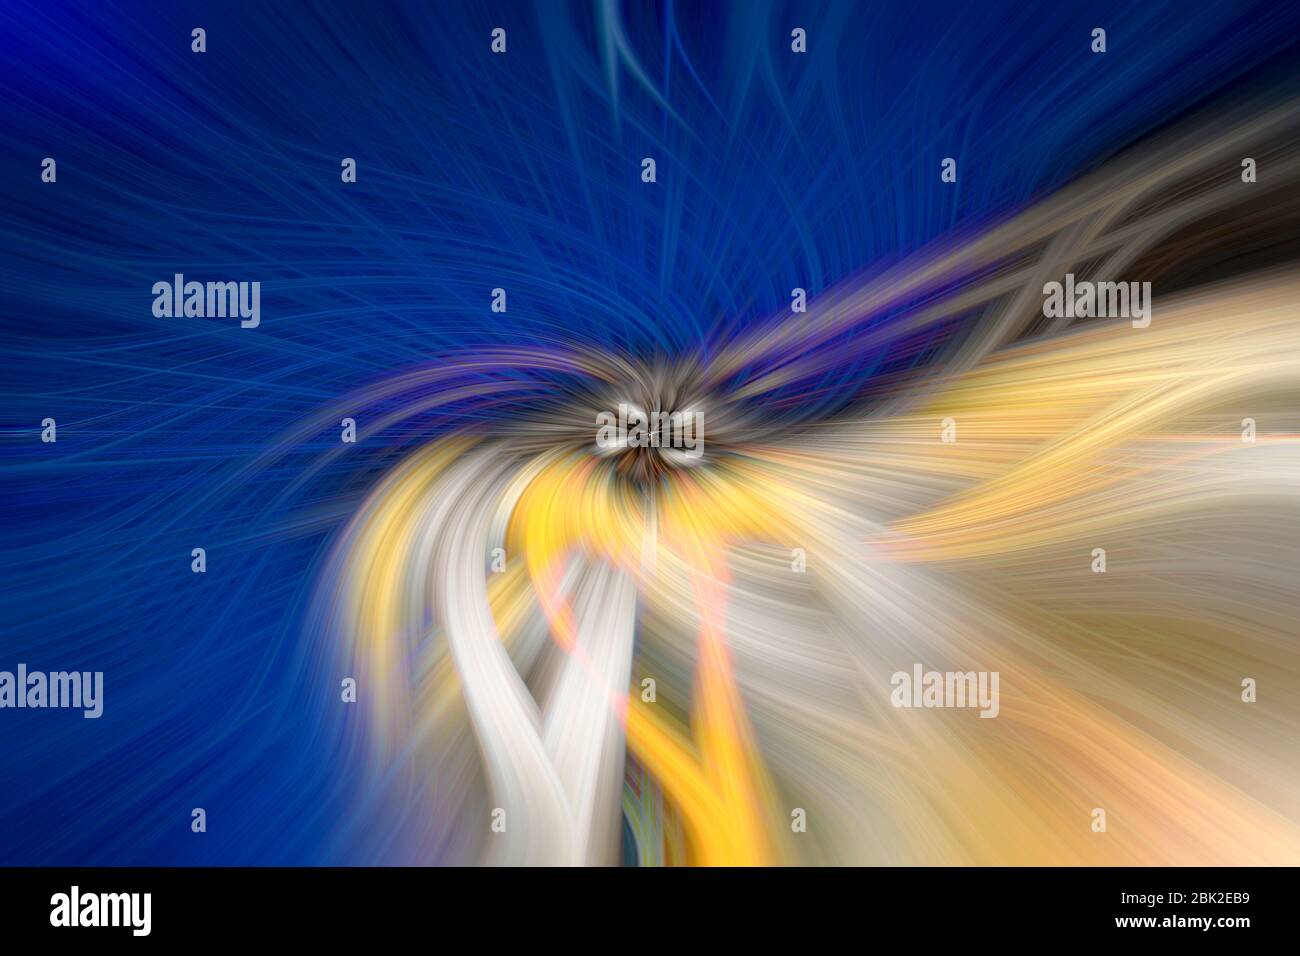 Abstract twisted fractal background,digital twirl design,abstract background Stock Photo